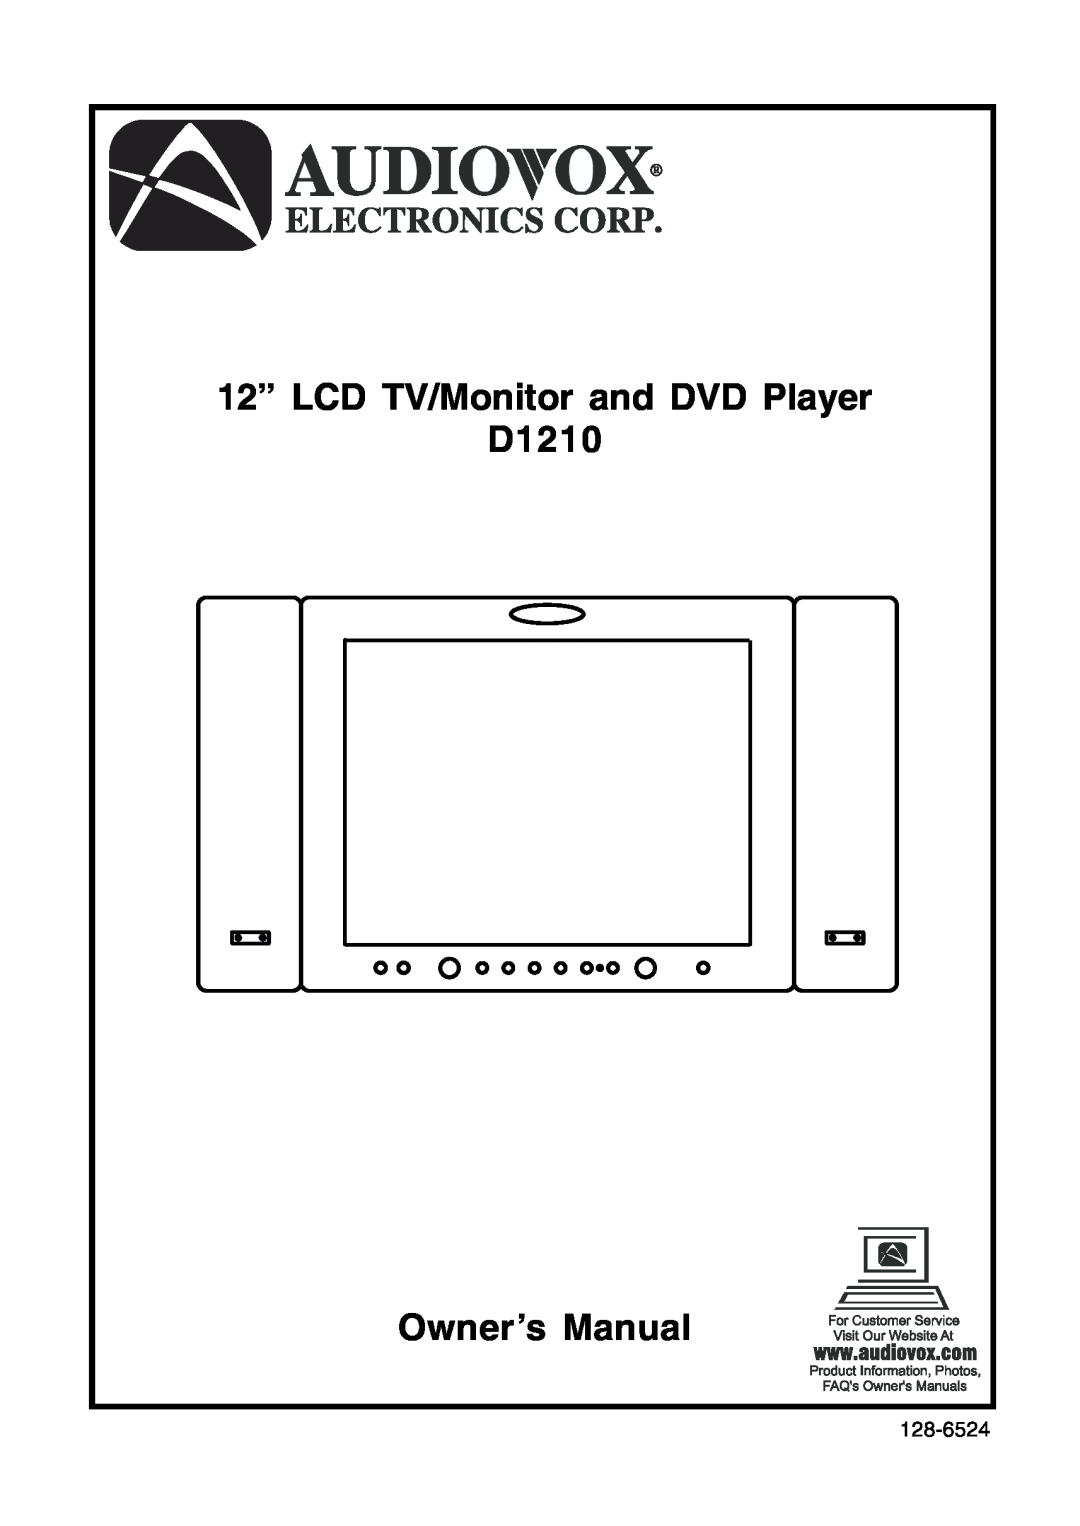 Audiovox D1210 owner manual 12” LCD TV/Monitor and DVD Player, Owner’s Manual, 128-6524 